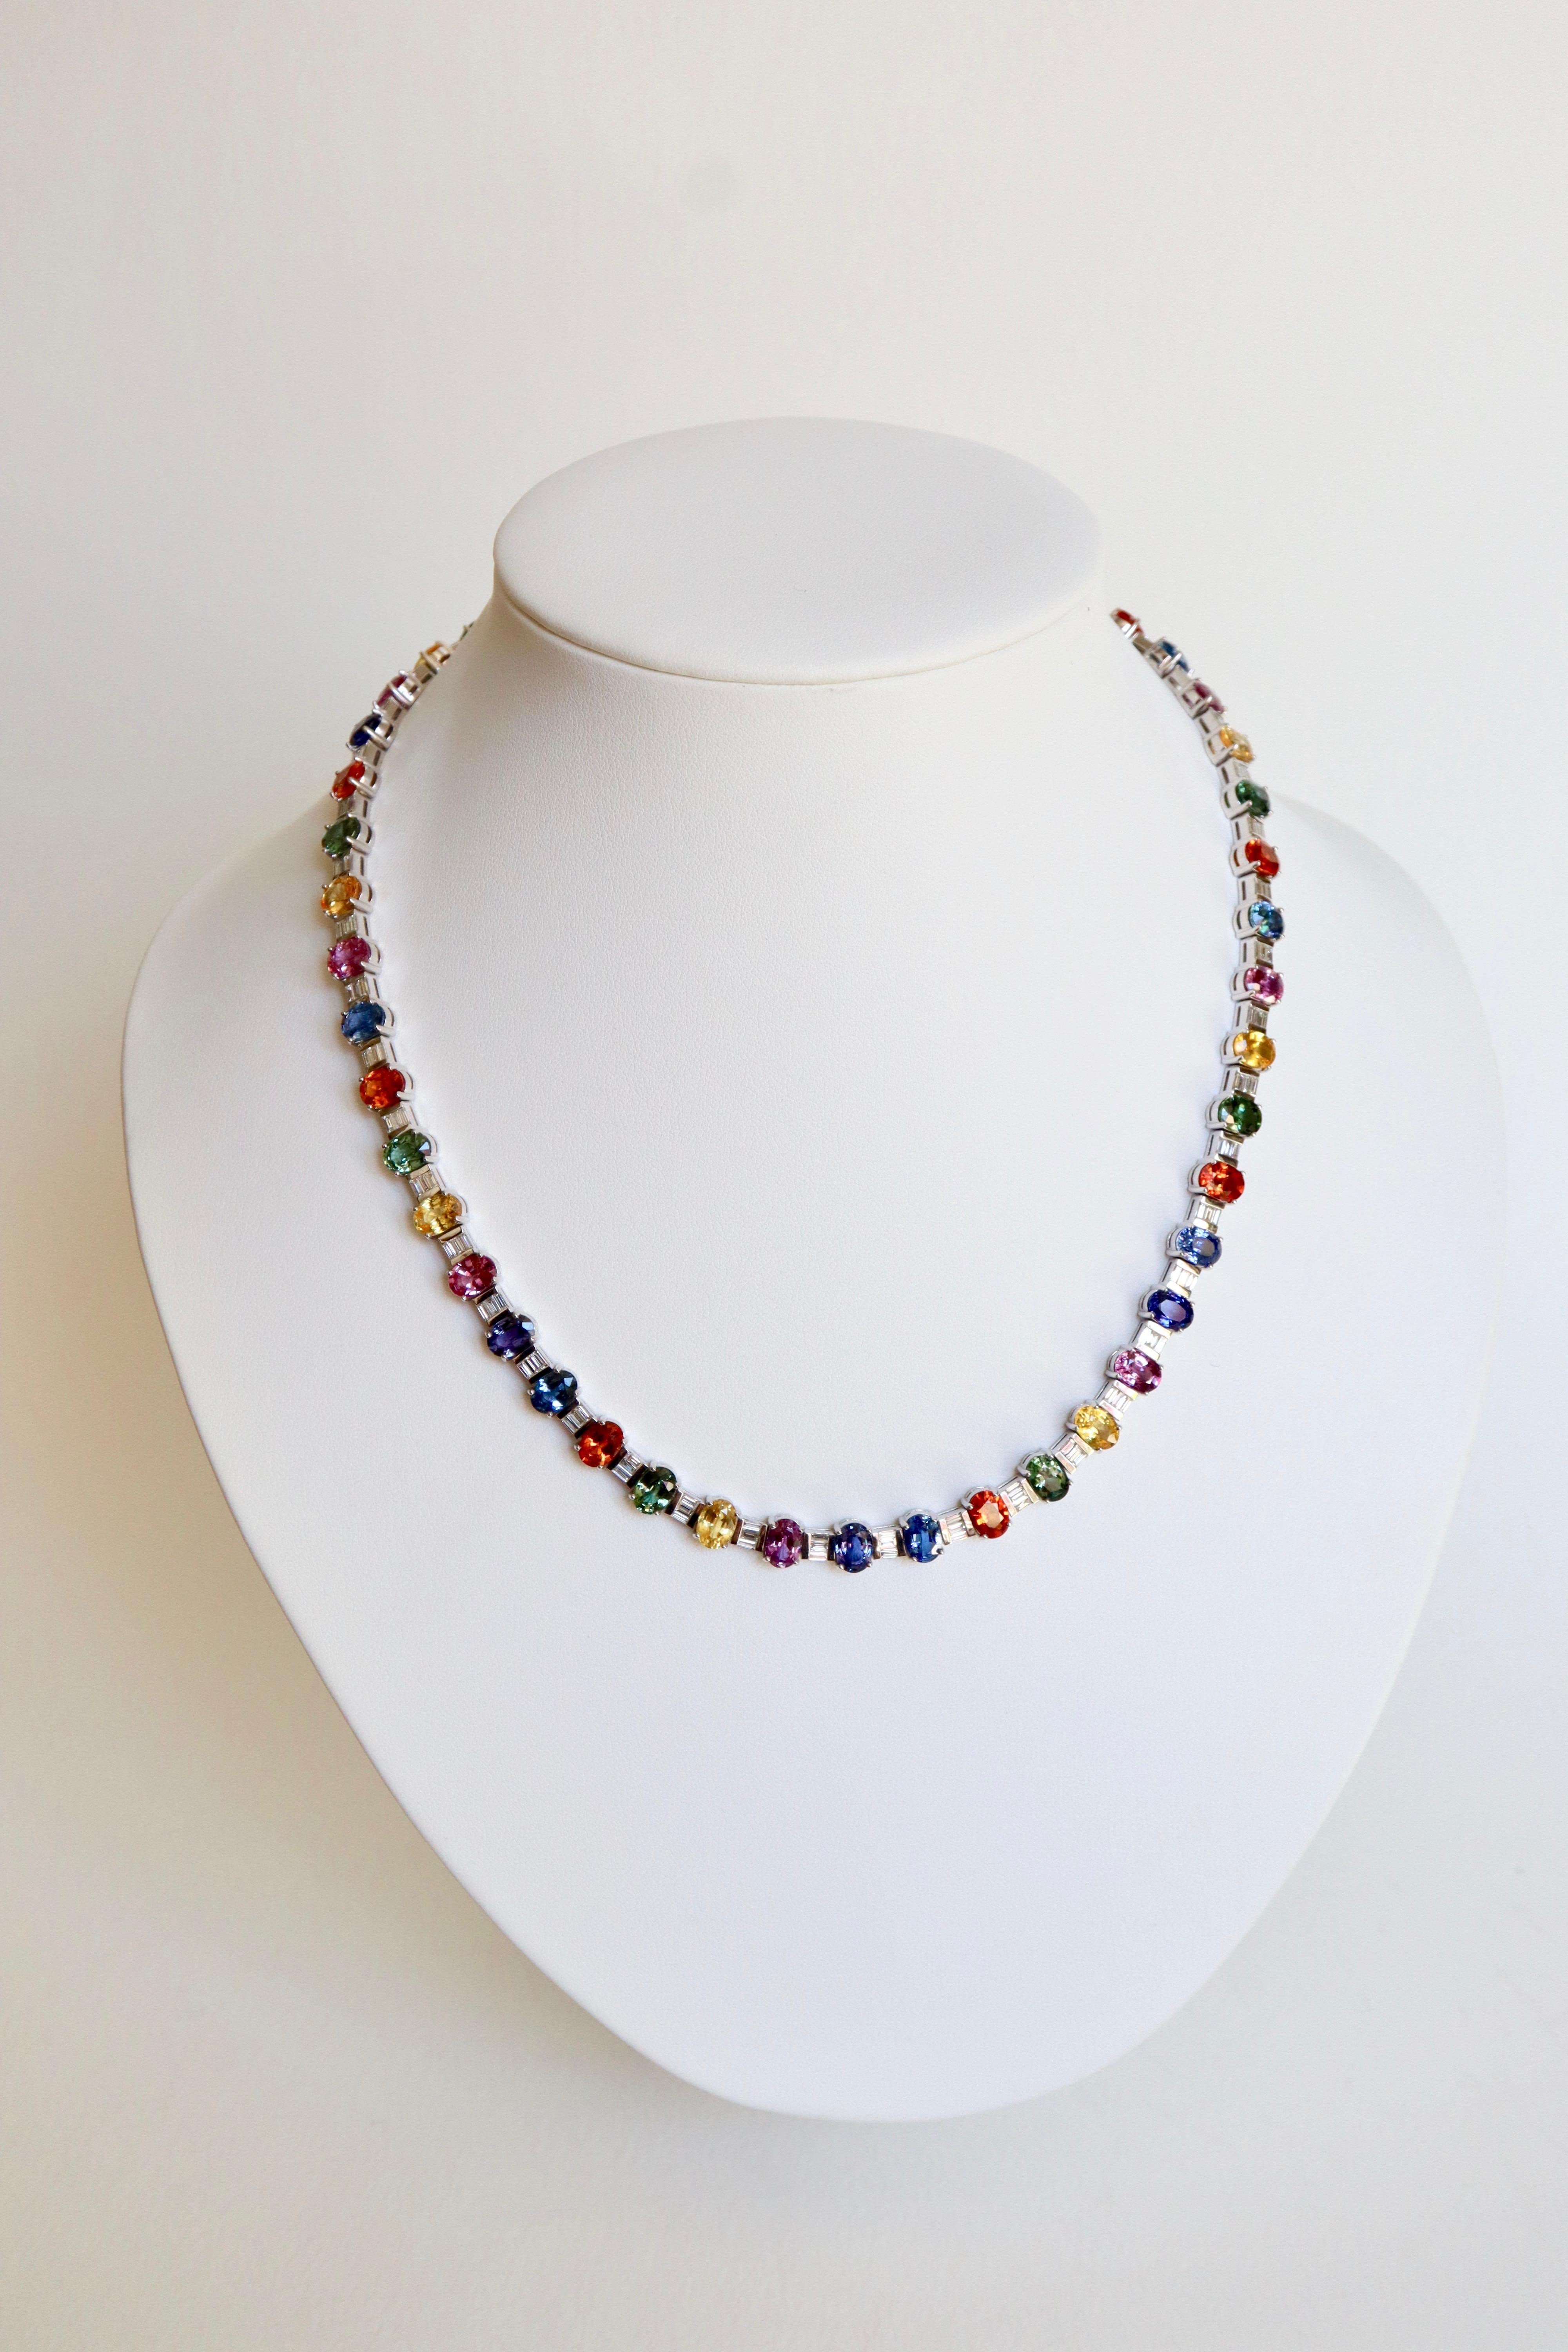 Necklace in 18 Carat white Gold composed of 48 Beautiful Multicolored Sapphires alternated with Baguette Diamonds.
Security clip. 
Hallmark of Eagle
Length: 45.5 cm Width: 7 mm
Sapphires Weight: 53 carats Dimension of sapphires: 7 cm x 5 cm
Weight